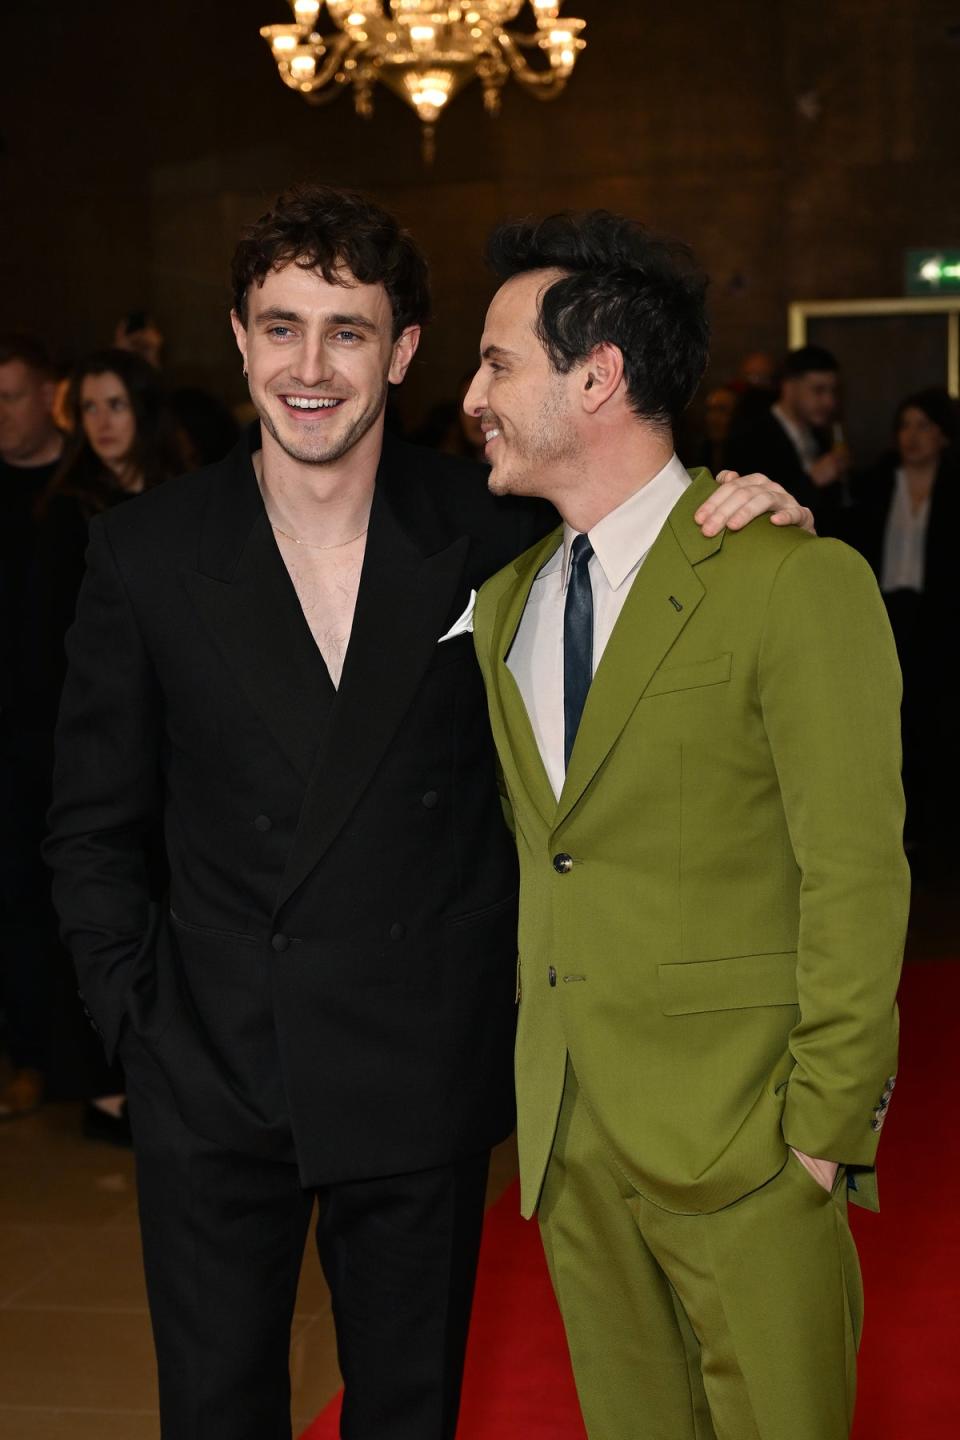 Paul Mescal (L) and Andrew Scott (R) attending the awards at The Mayfair Hotel (Gareth Cattermole/Getty Images)